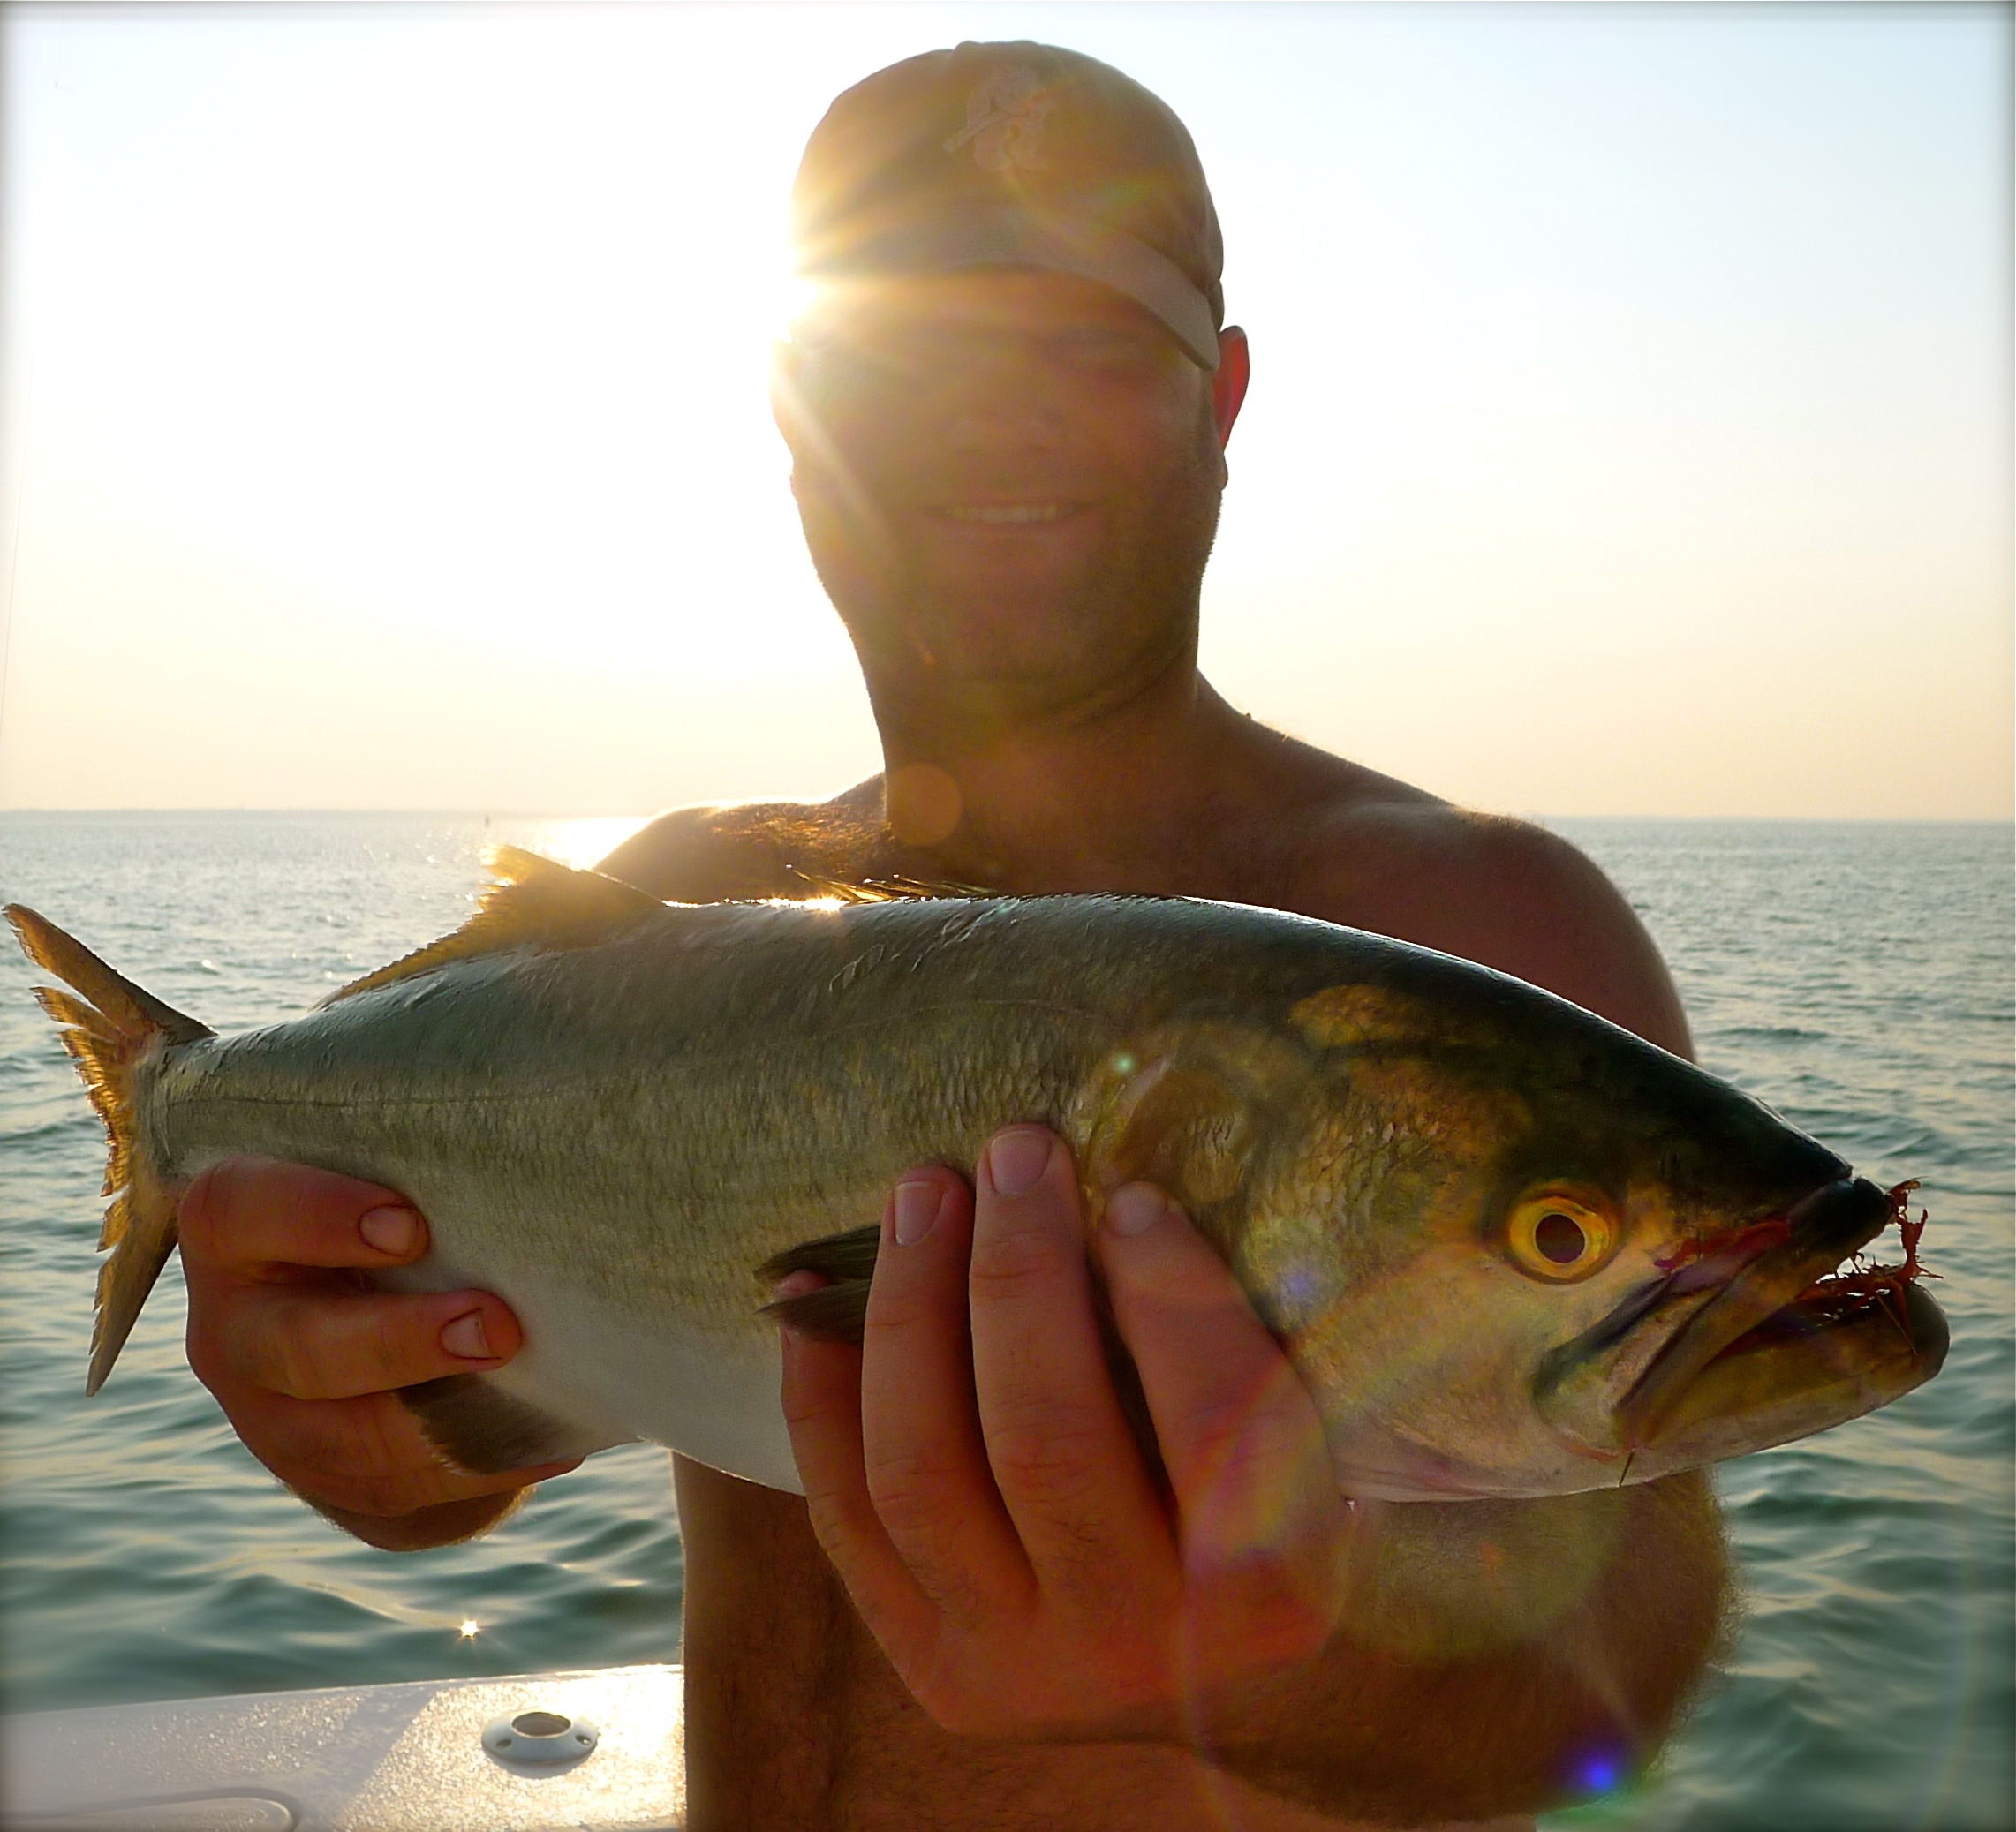 Get Big Fish out of Summer Breakers - Chesapeake Light Tackle